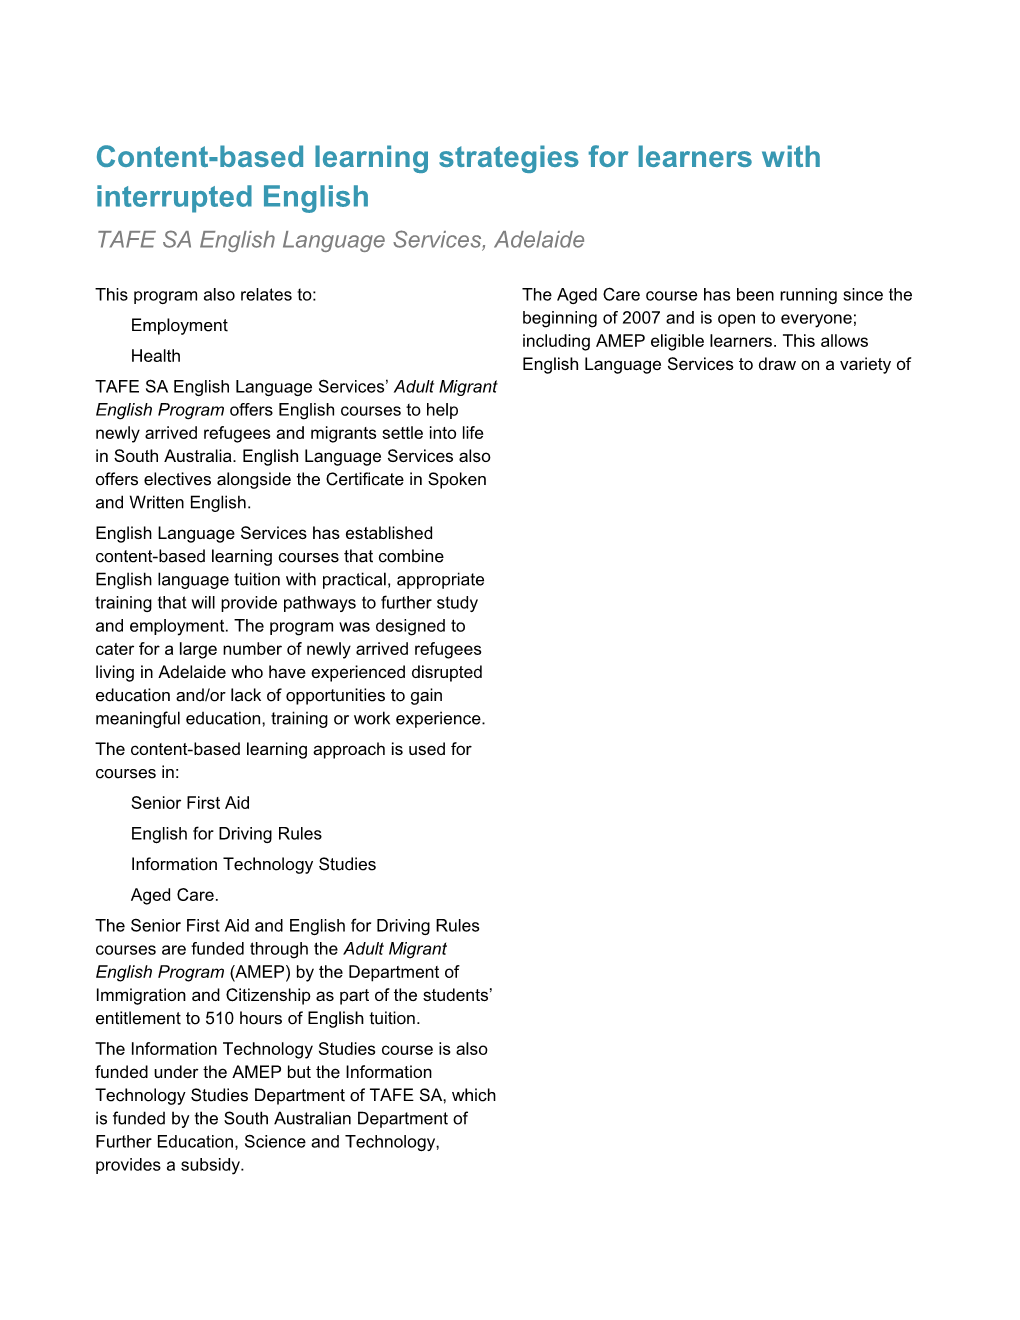 Content-Based Learning Strategies for Learners with Interrupted English